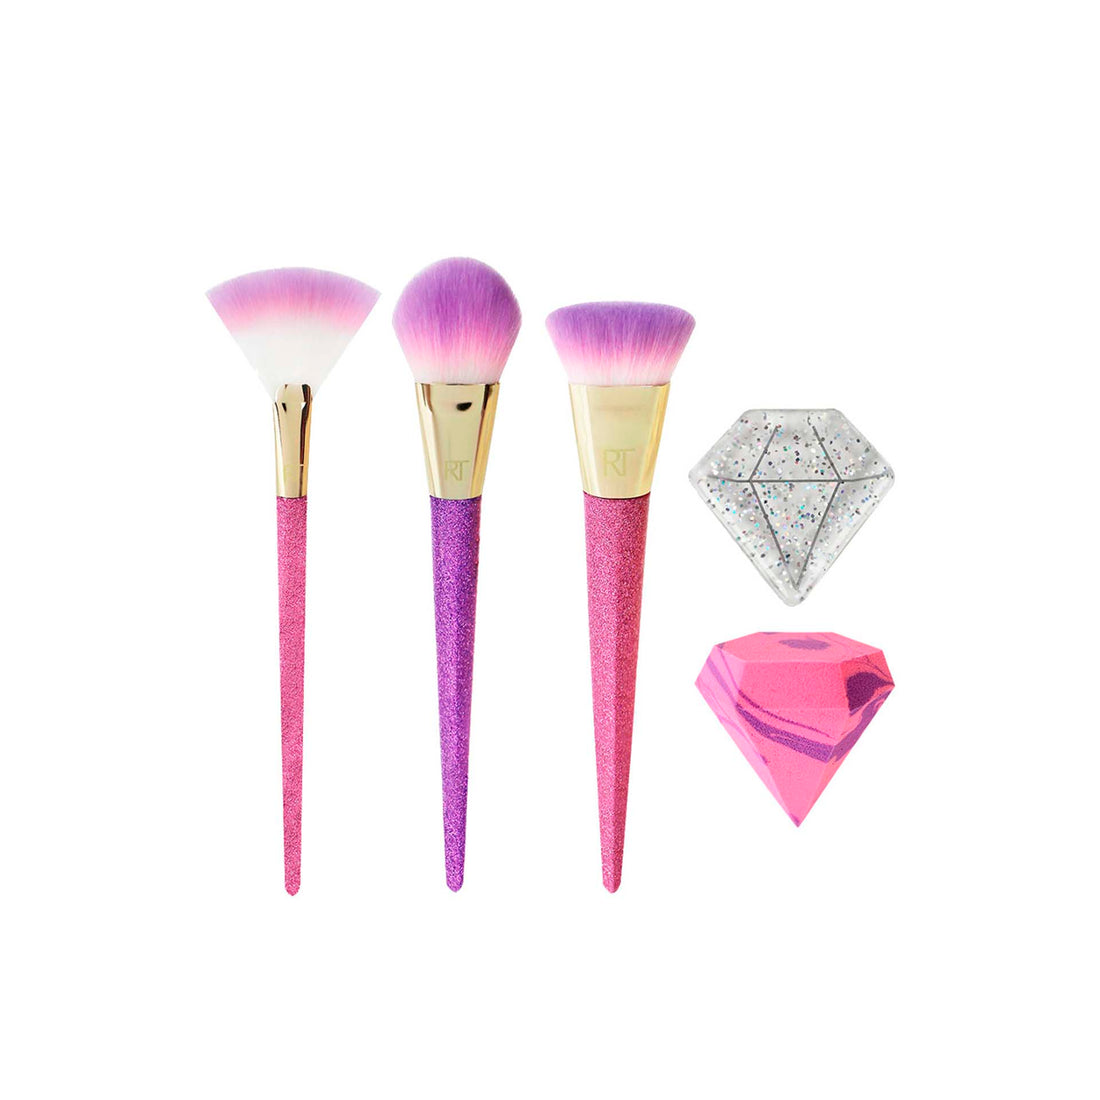 Real Techniques - Set 3 Makeup Brushes With 2 Base Applicators